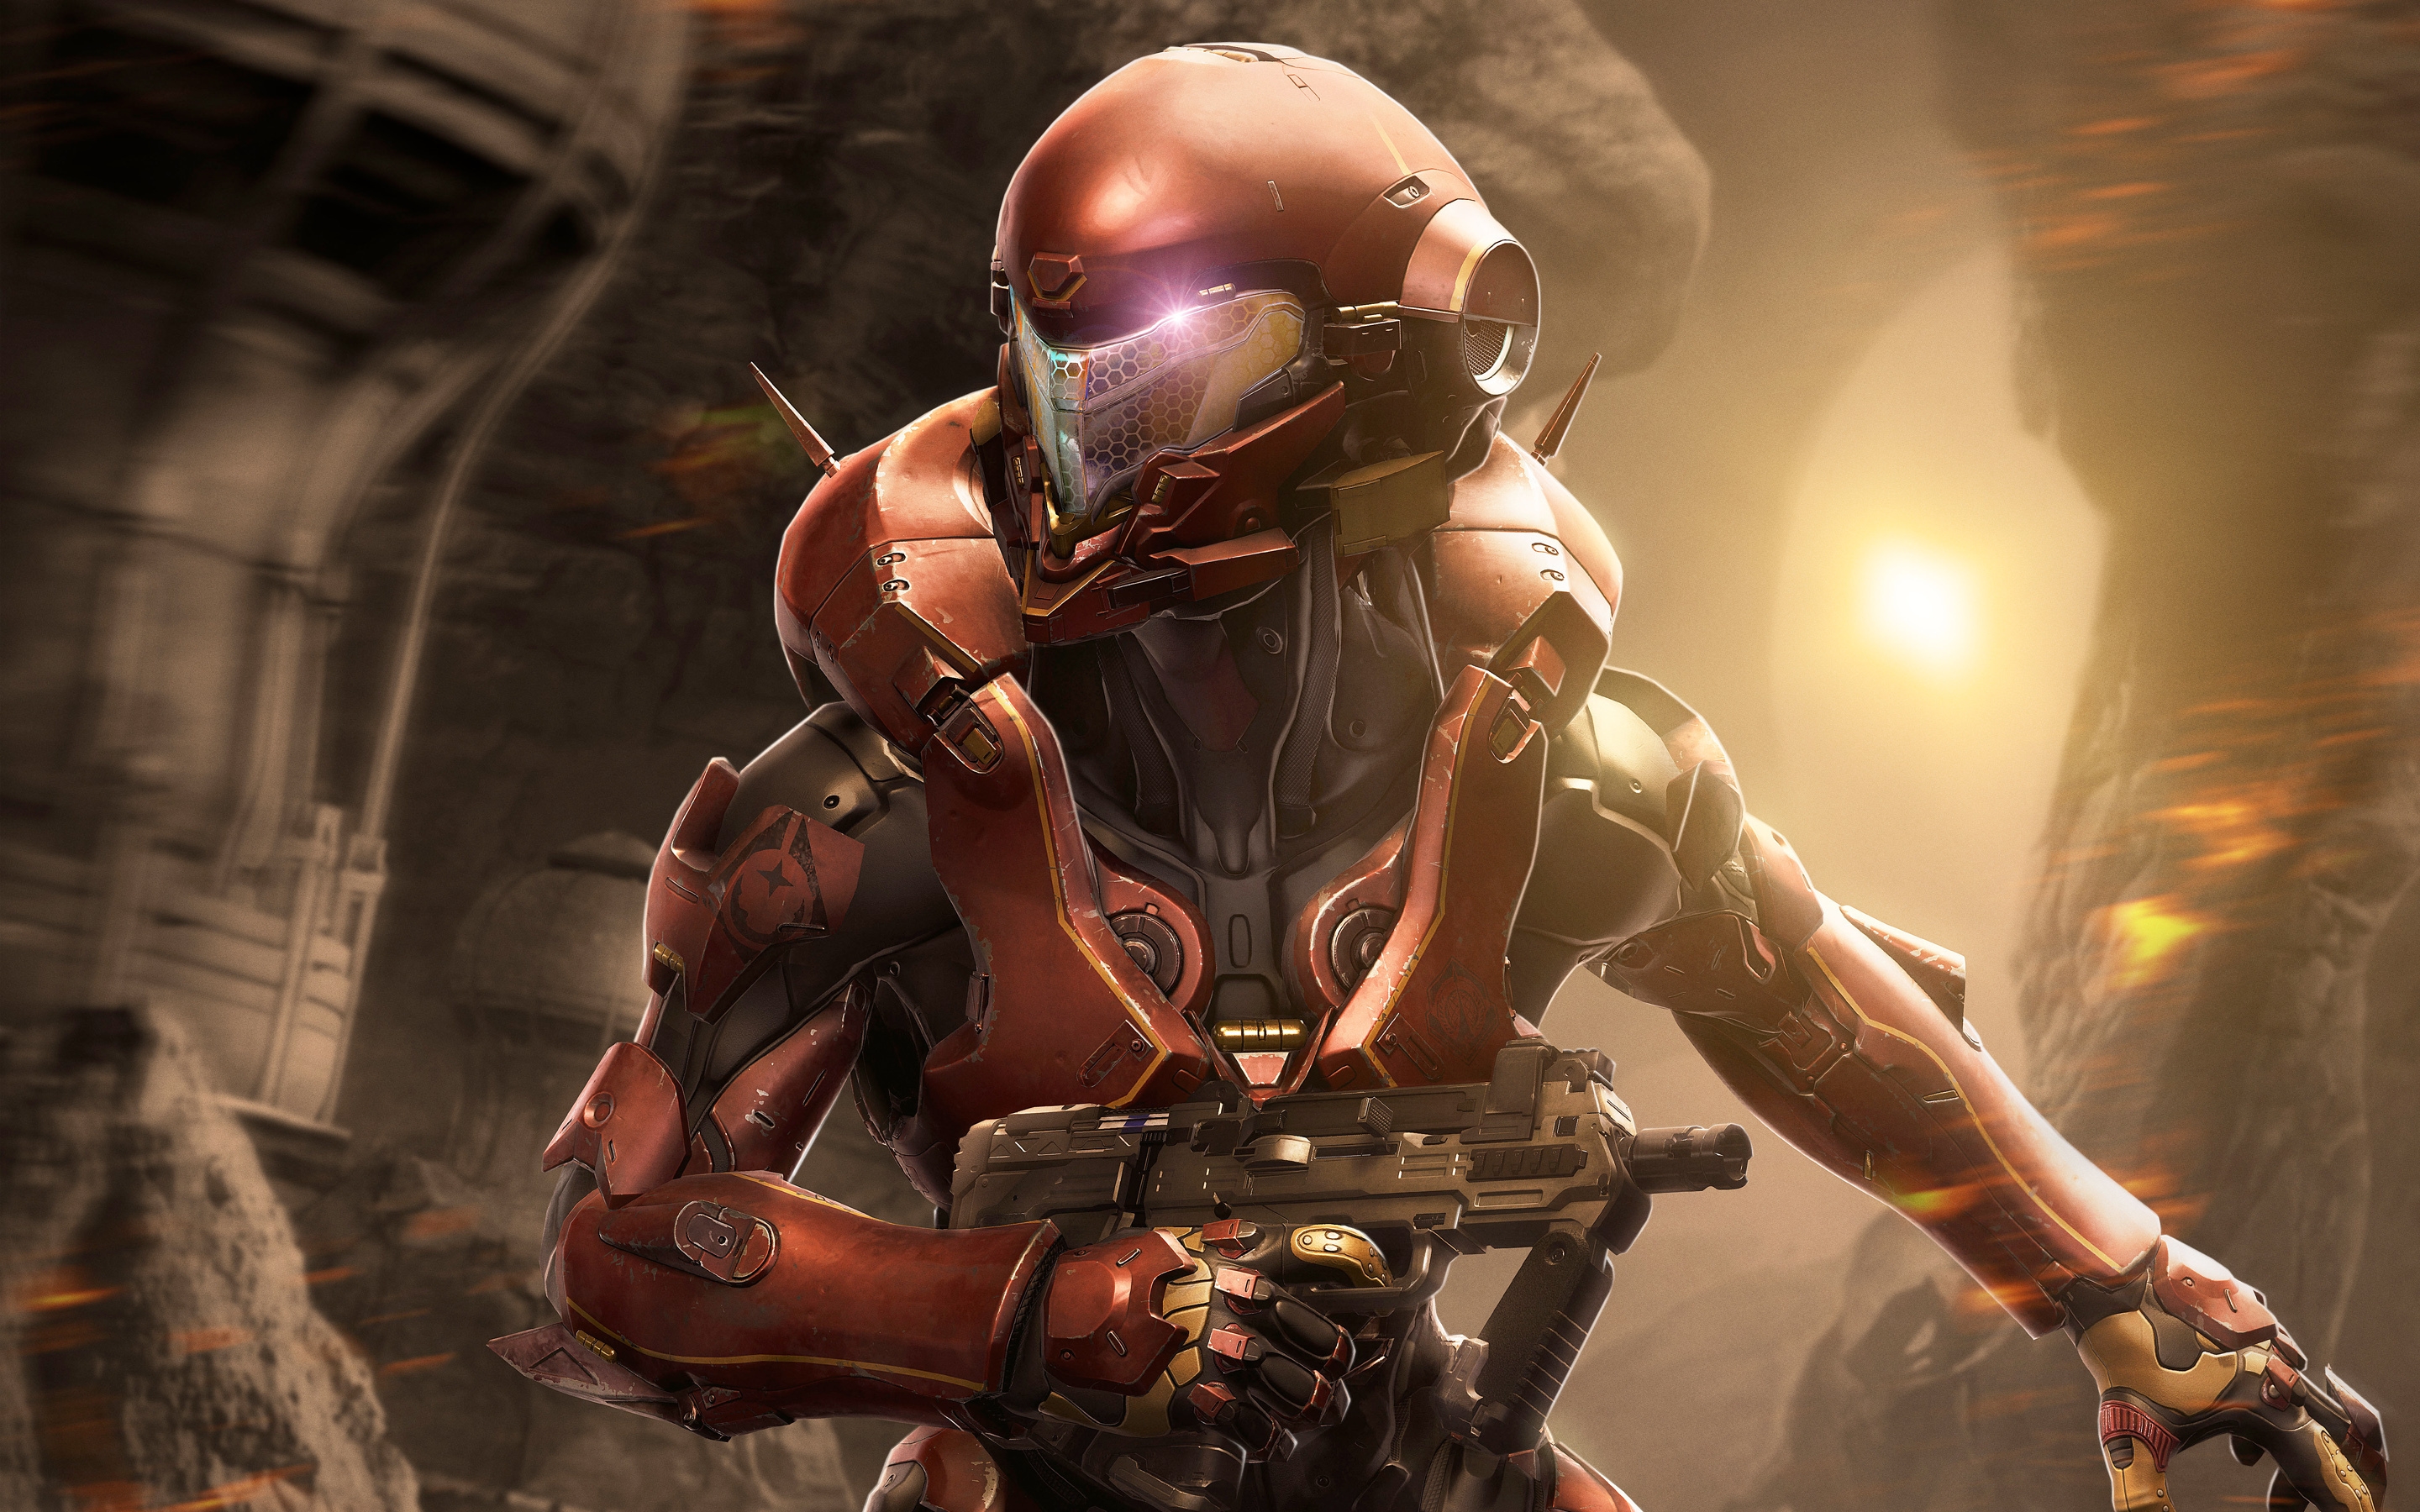 Halo 5 Soldier for 2880 x 1800 Retina Display resolution